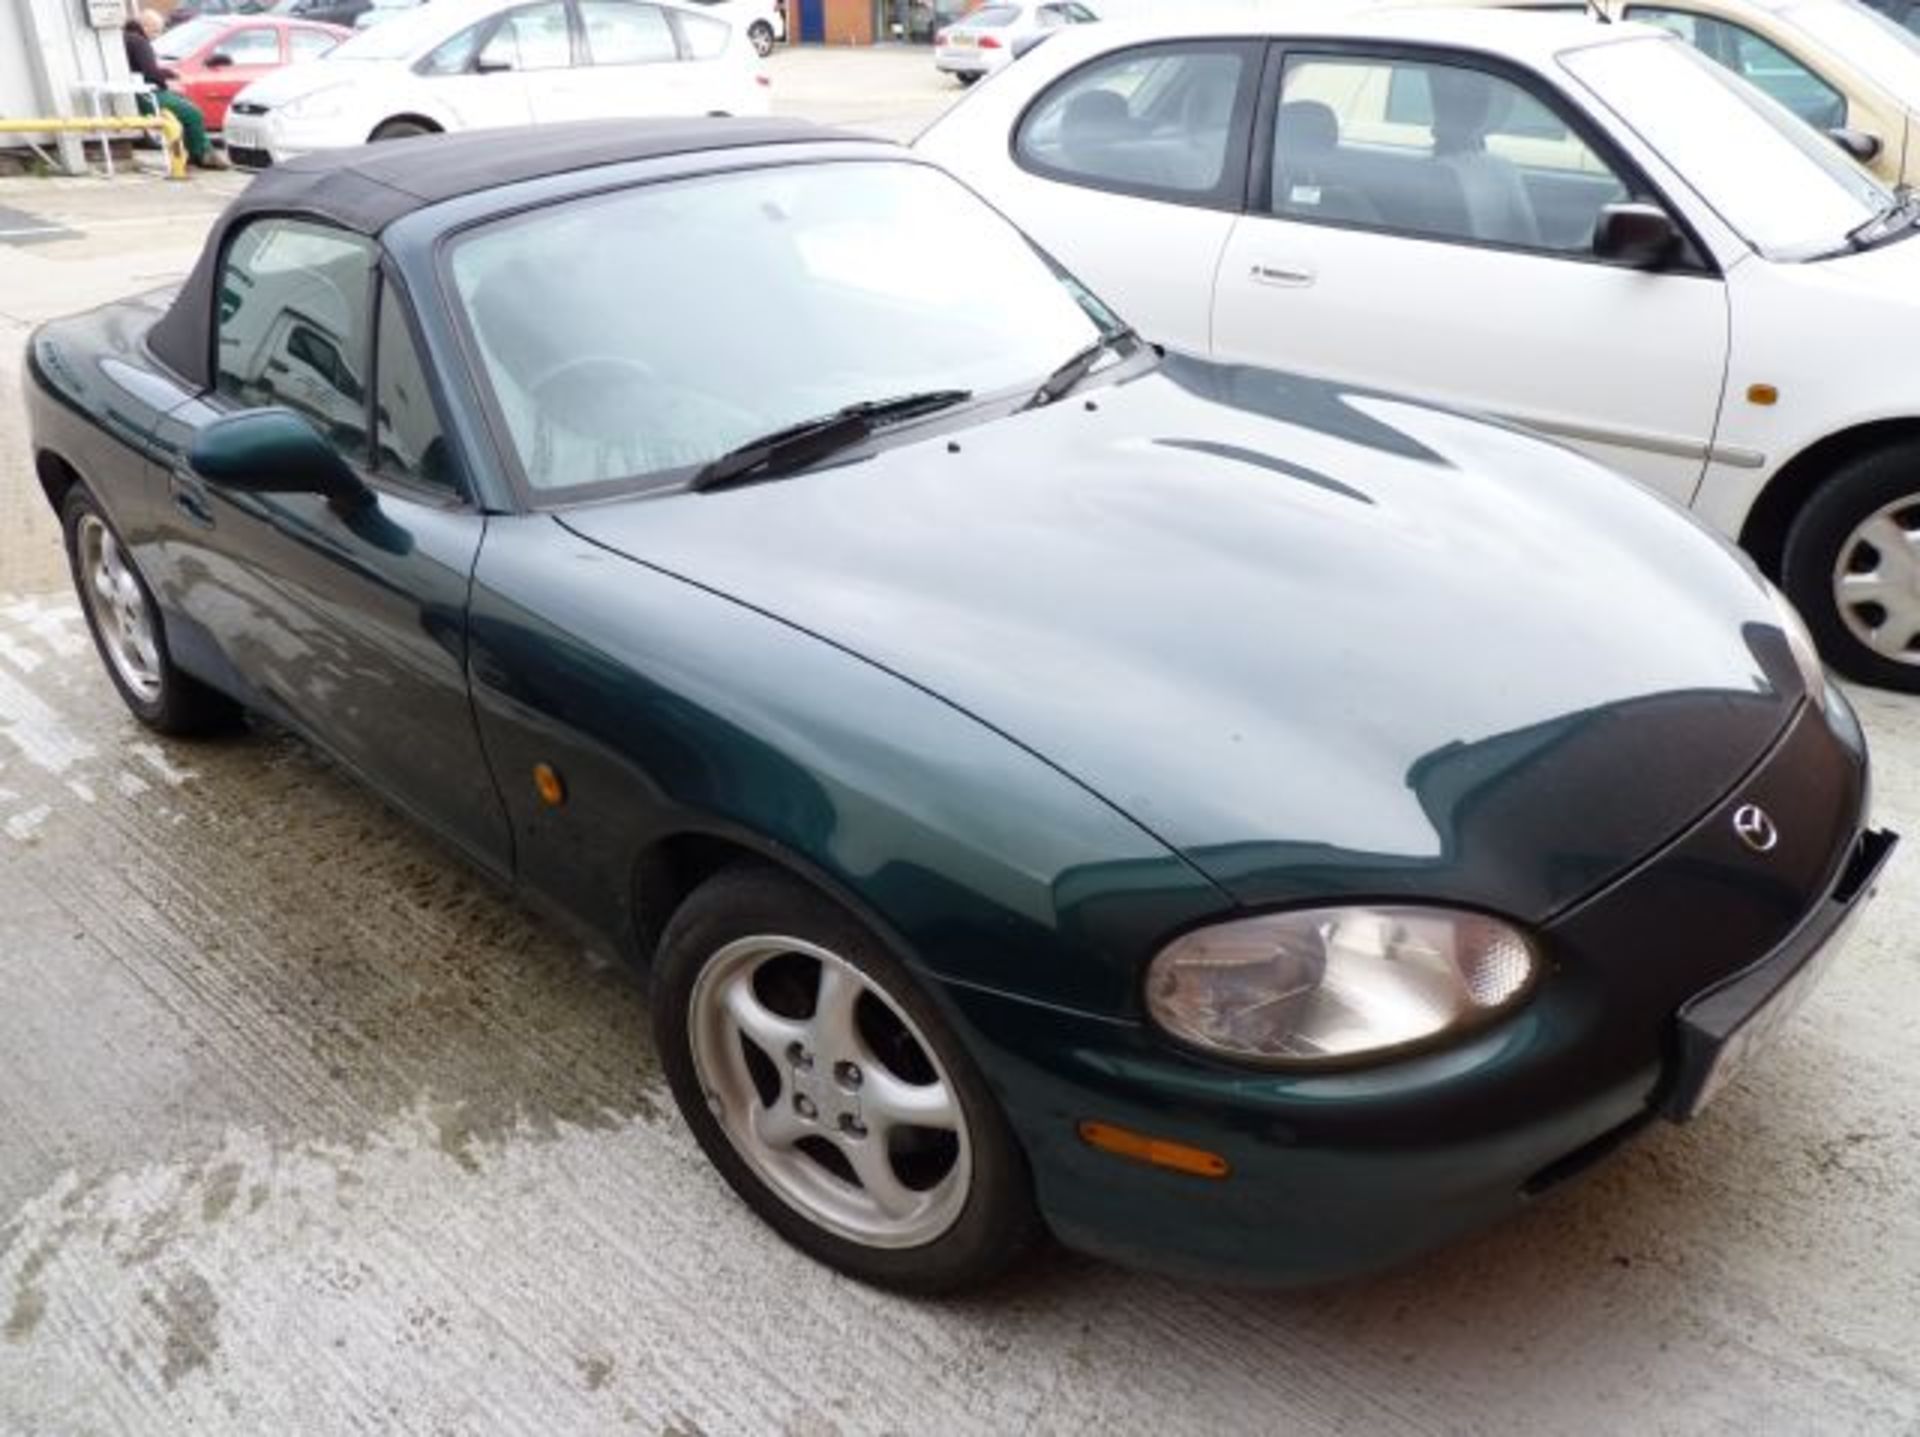 X PLATE MAZDA MX5 SOFT-TOP CONVERTIBLE; 1.8 PETROL; 107163 RECORDED MILES; REG X431 WNL; TAX - Image 7 of 7